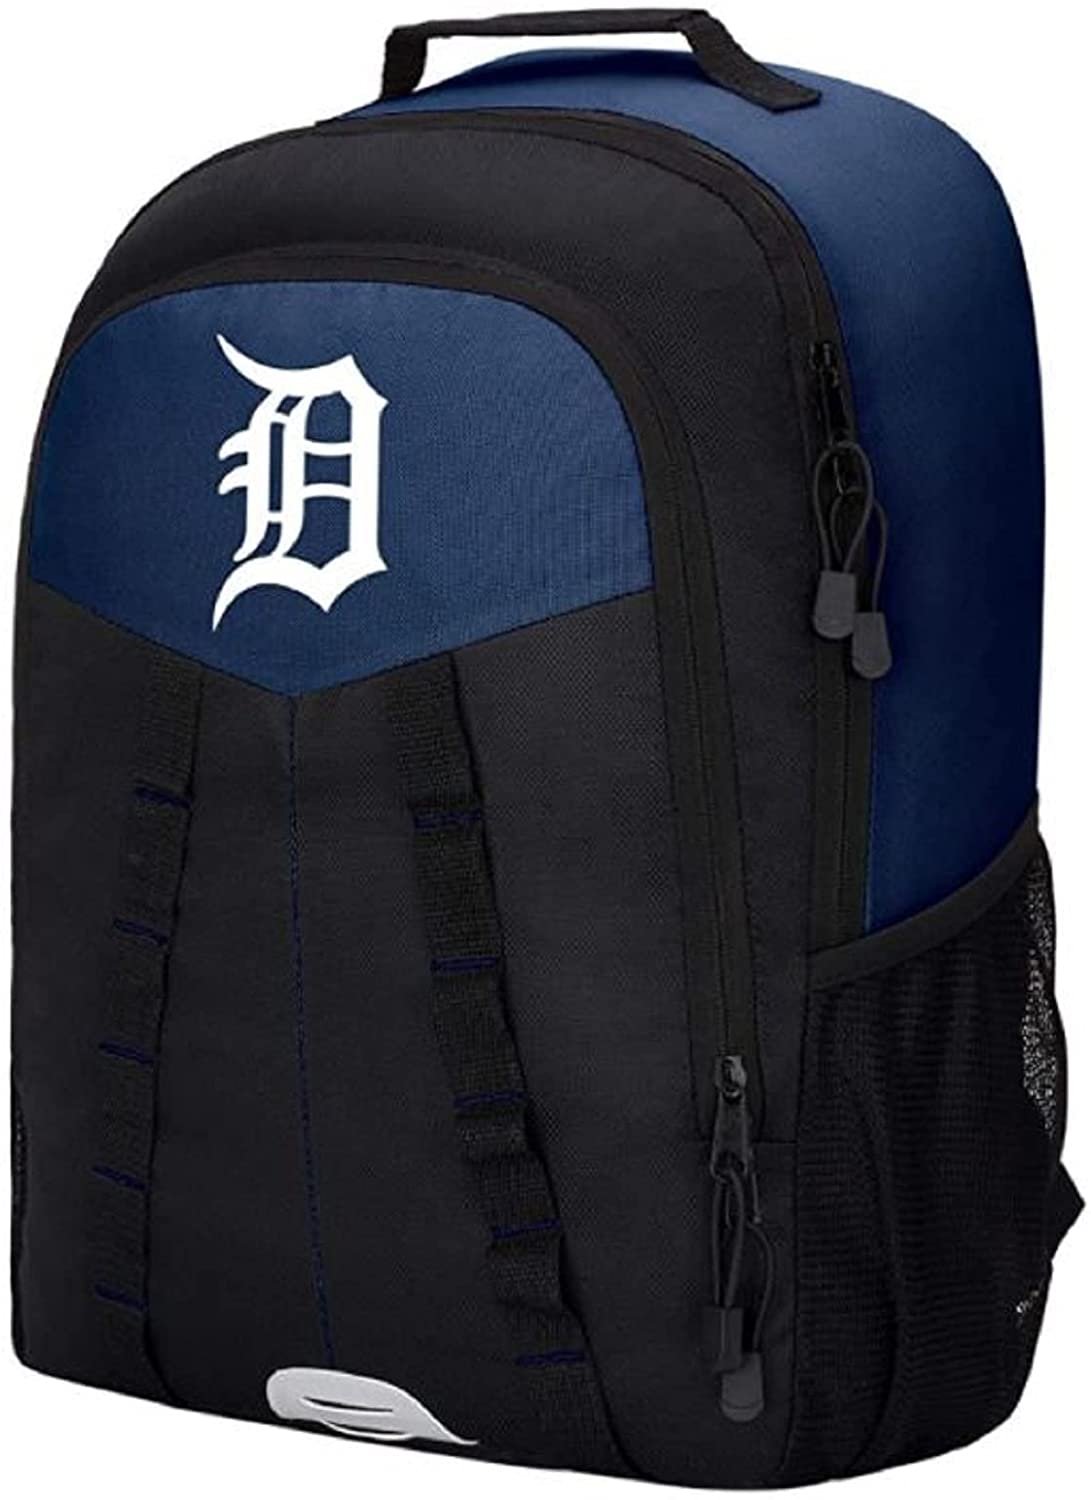 Detroit Tigers Backpack Premium Embroidered Heavy Duty Scorcher Design, 18.5x12.5x5 Inch